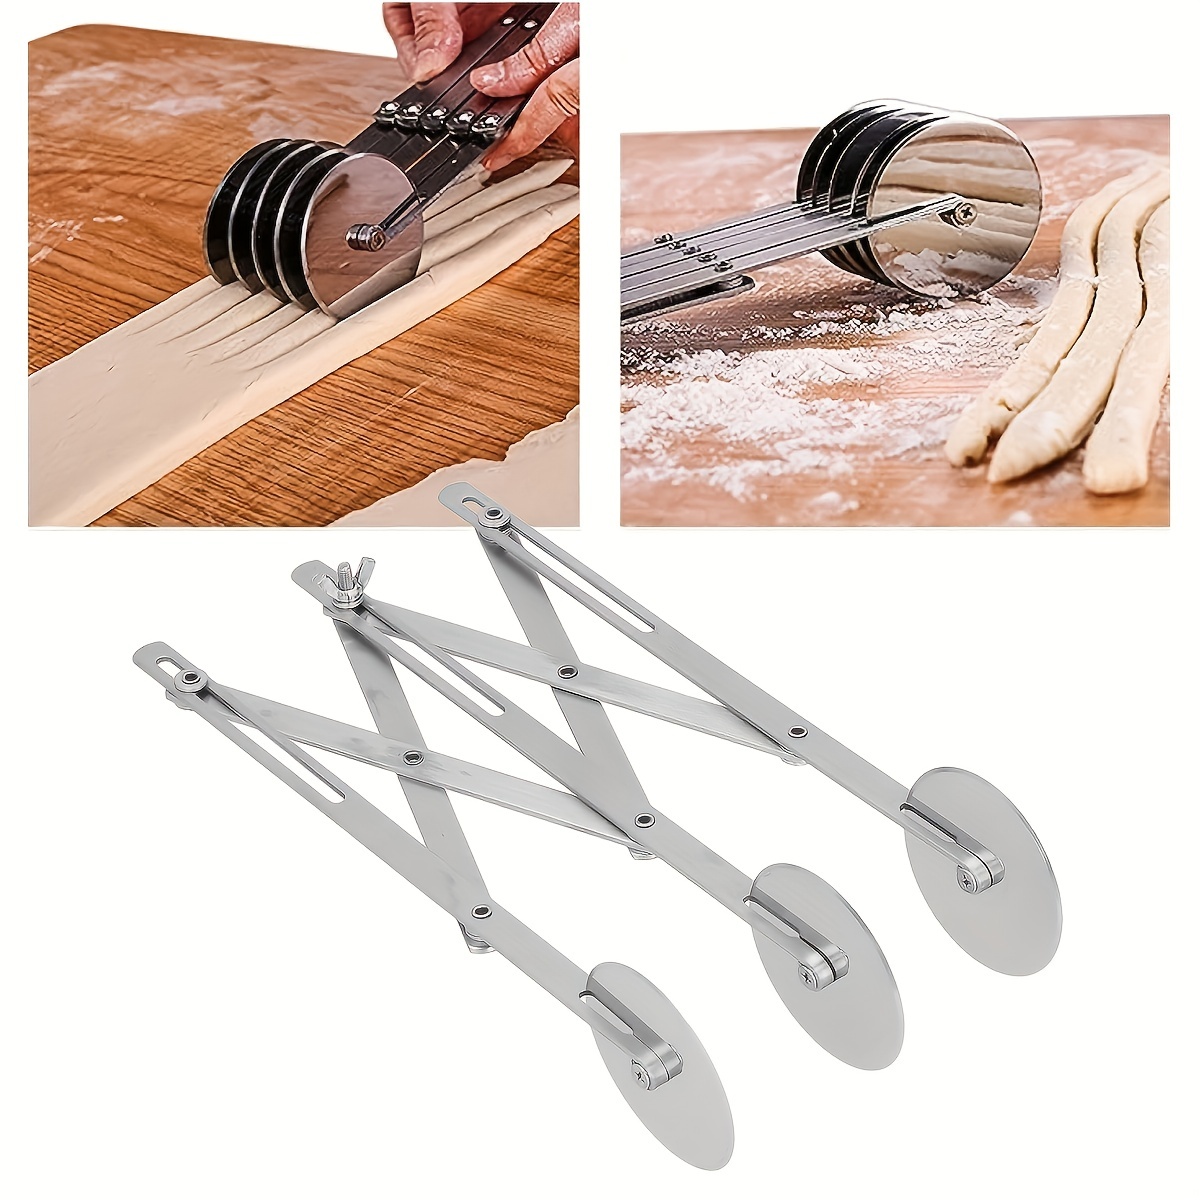 4 Wheel Stainless Steel Pastry Cutter,Expandable Pizza Slicer,Adjustable  Cutter Roller Cookie Dough Cutter Divider